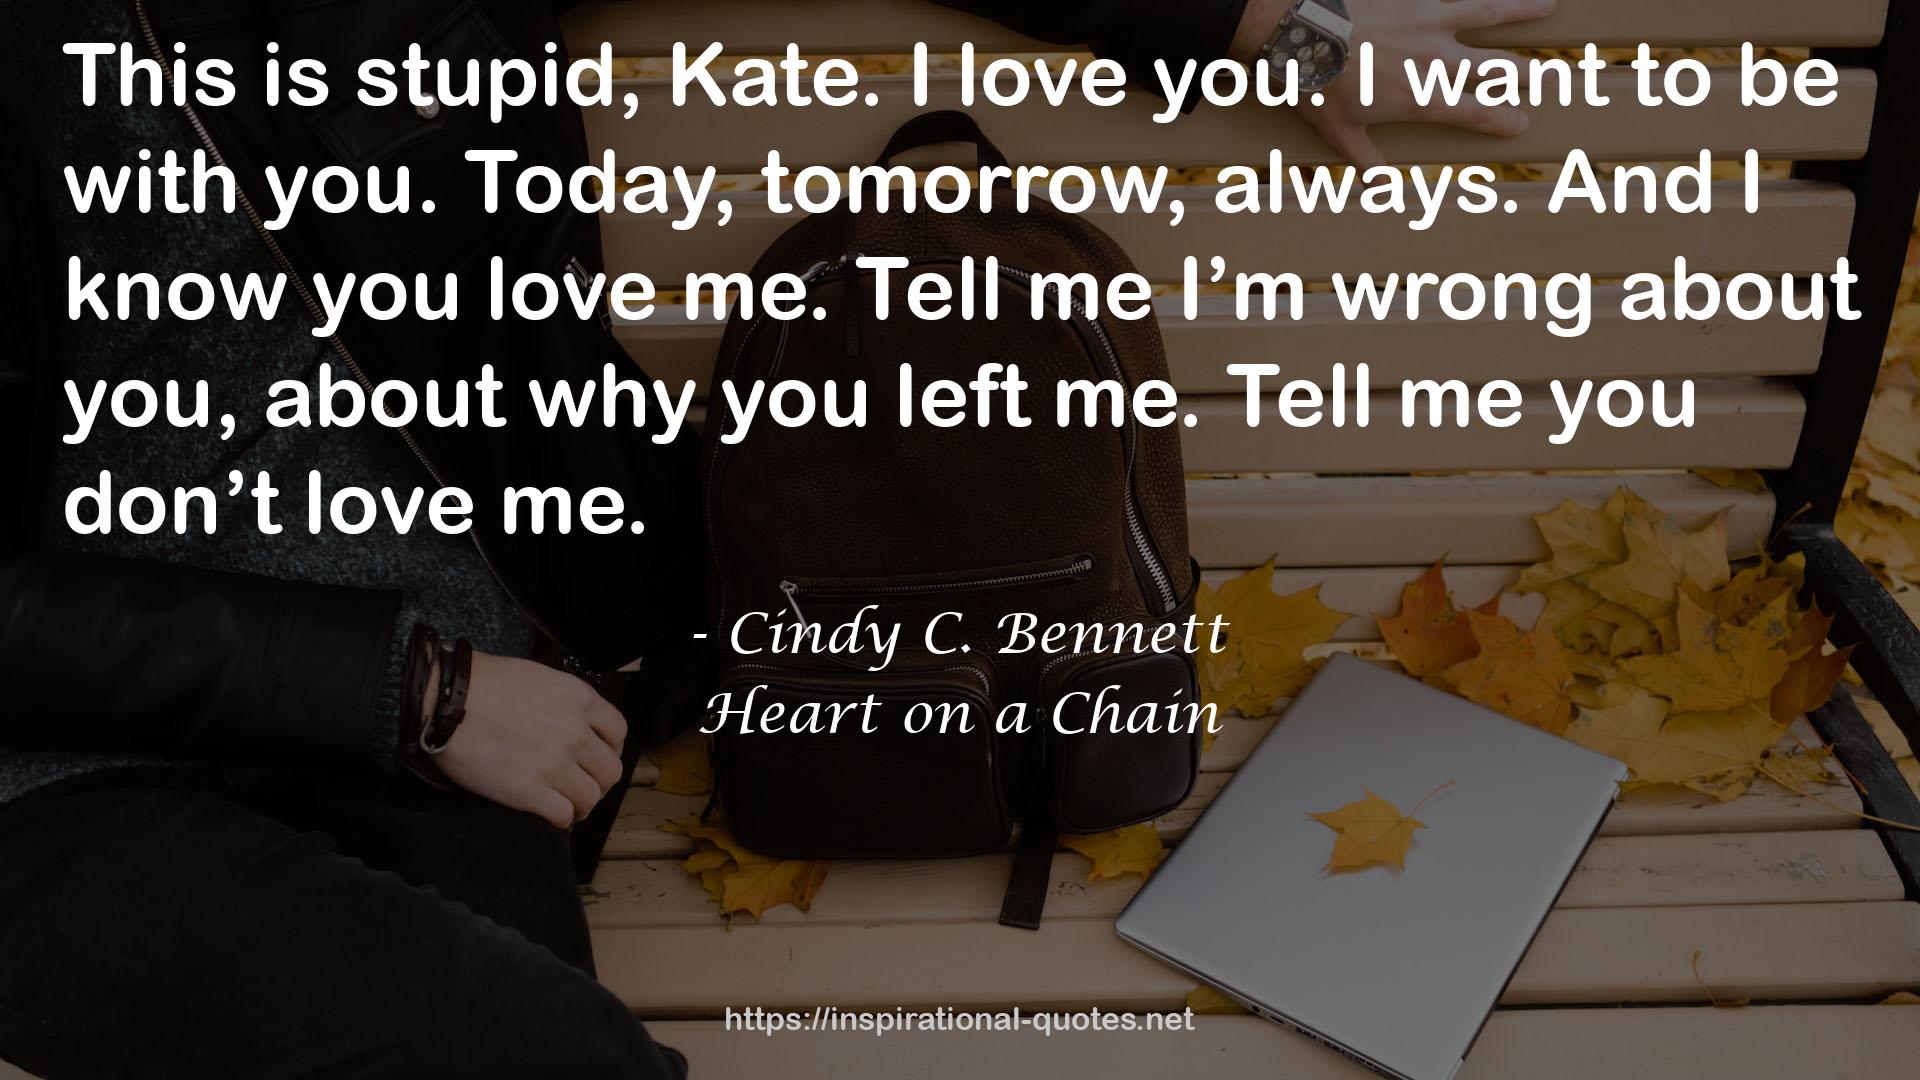 Heart on a Chain QUOTES